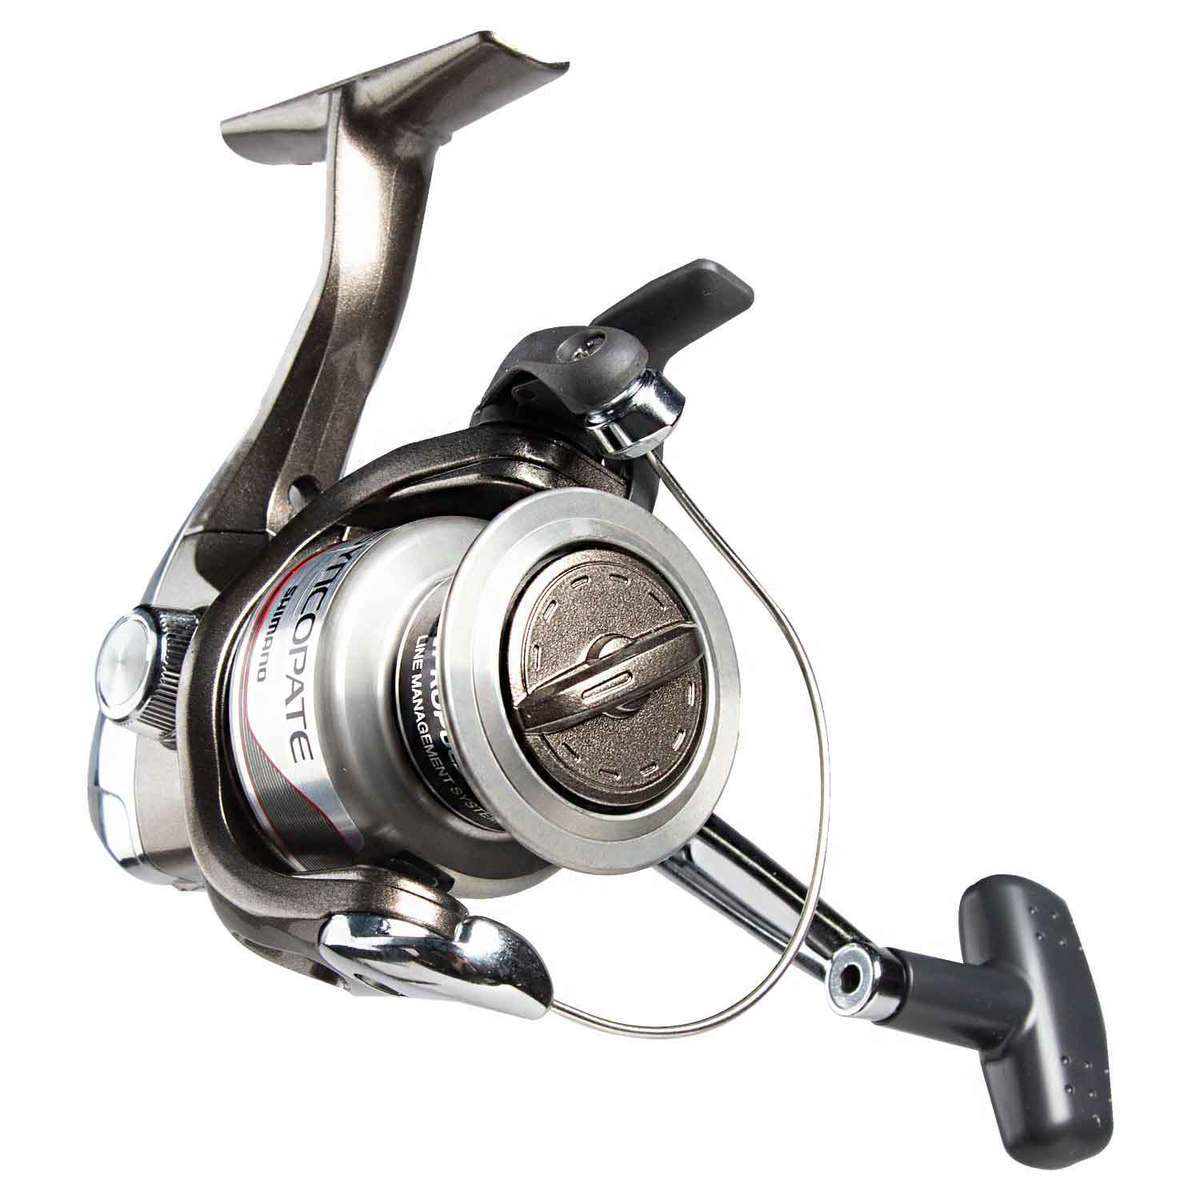 Portable Spinning Reels with Trigger, Fishing Reels Spinning